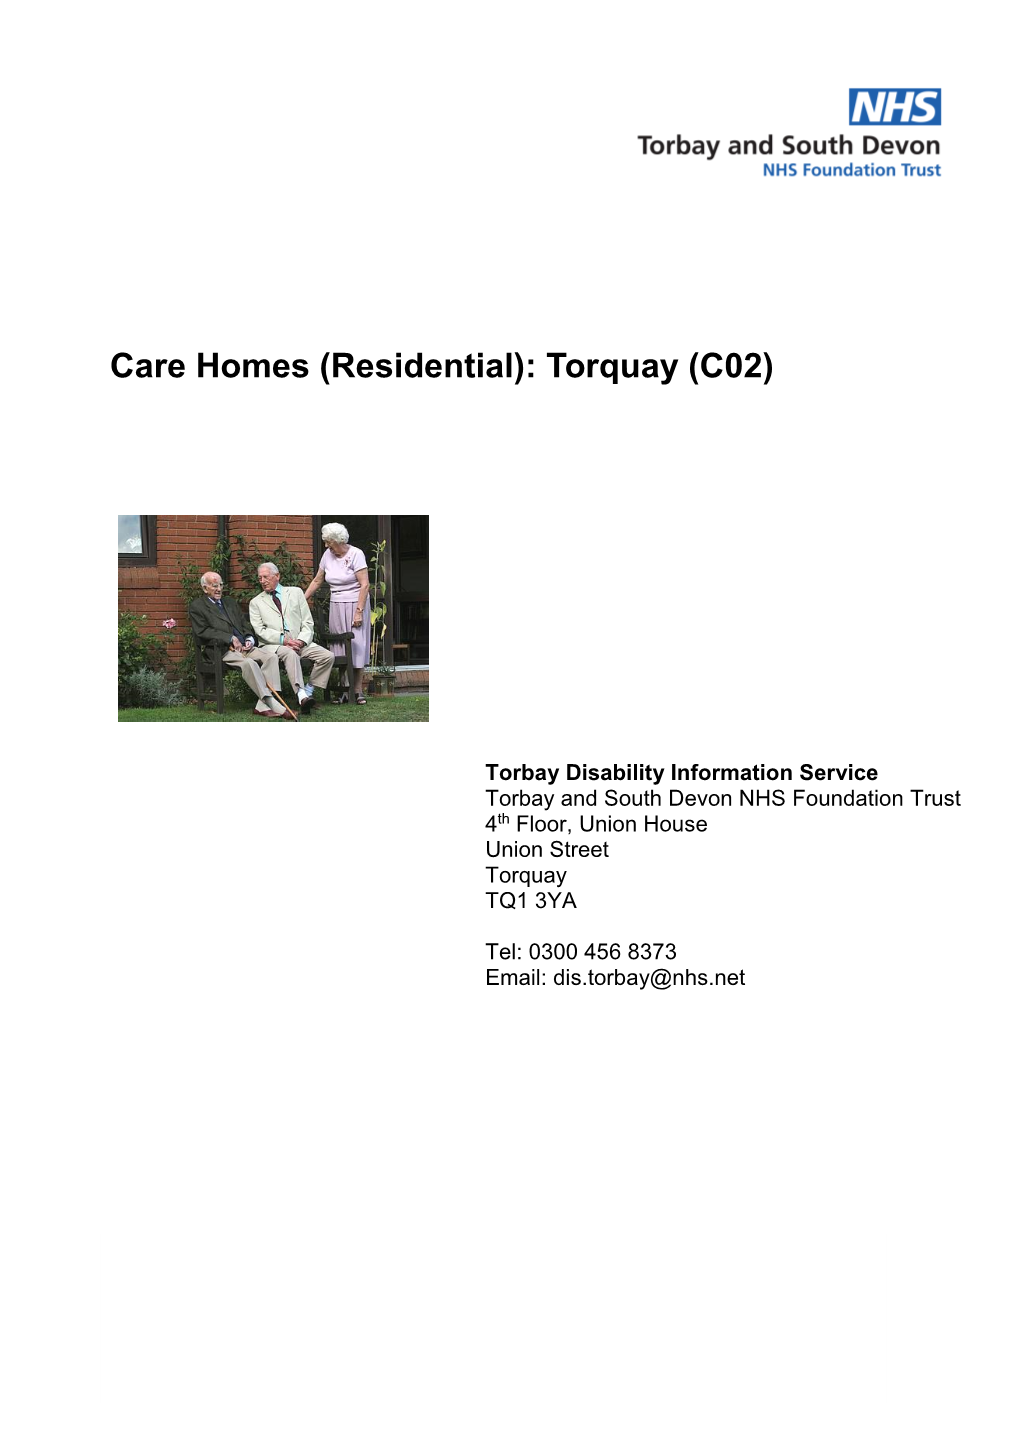 Care Homes (Residential): Torquay (C02)